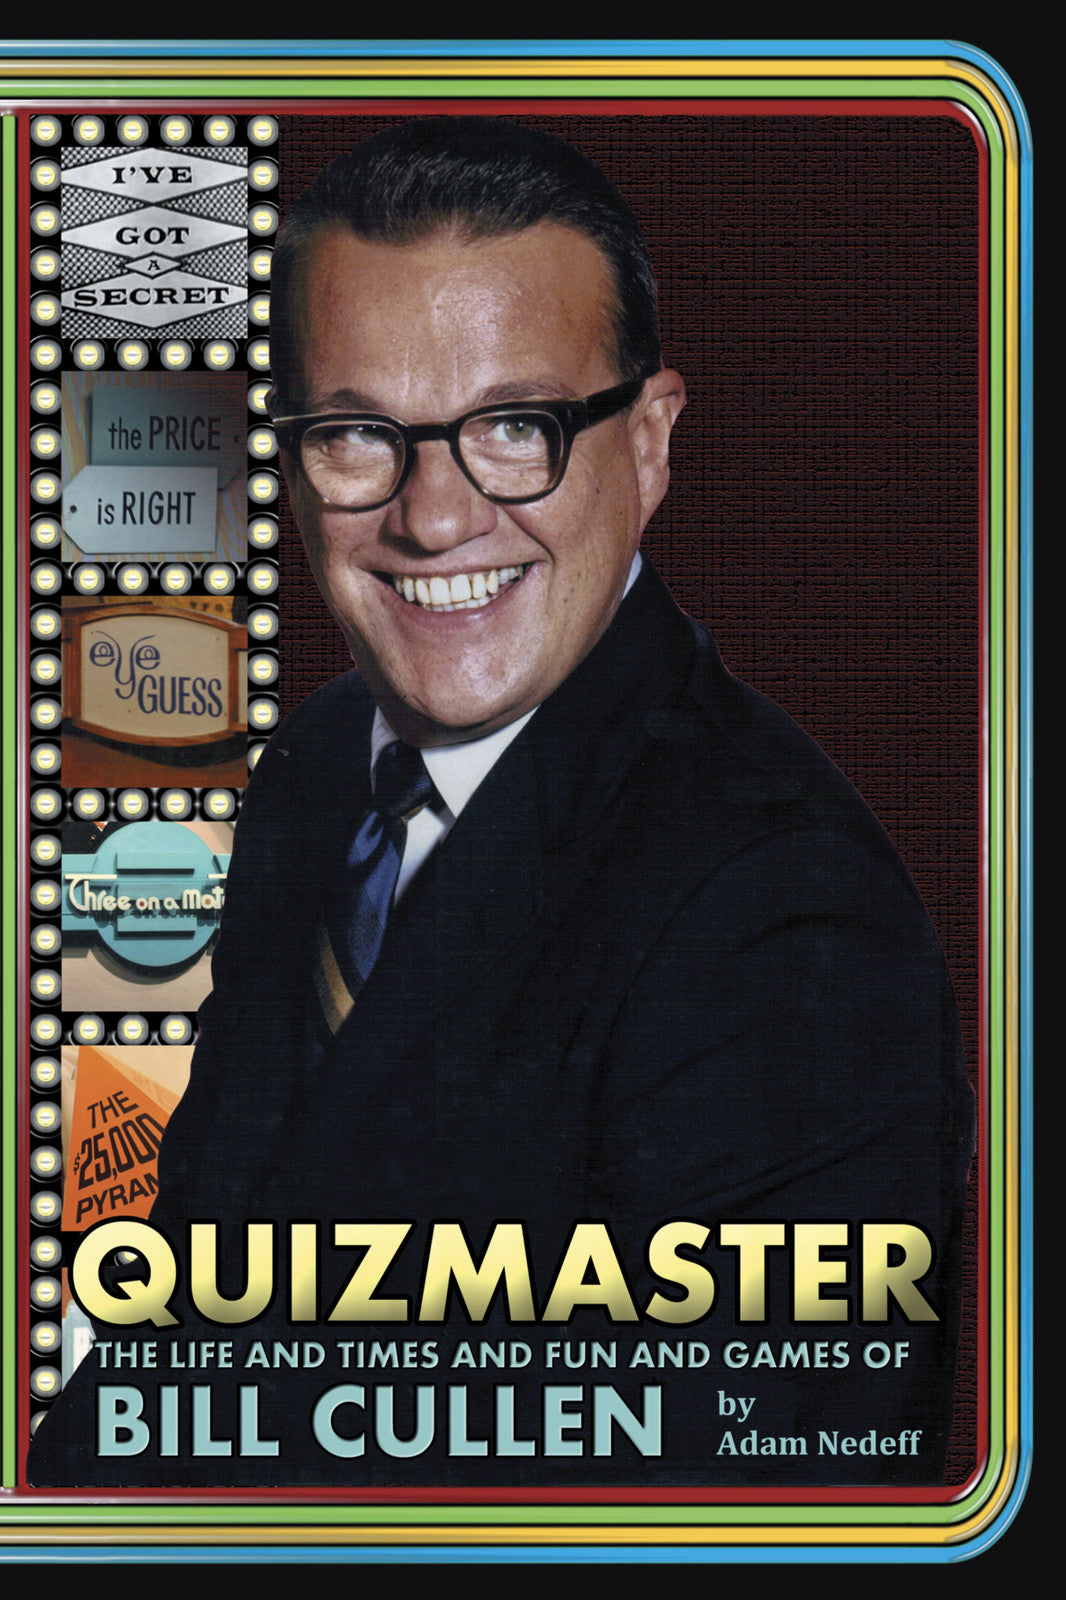 QUIZMASTER: THE LIFE AND TIMES AND FUN AND GAMES OF BILL CULLEN (audiobook) - BearManor Manor